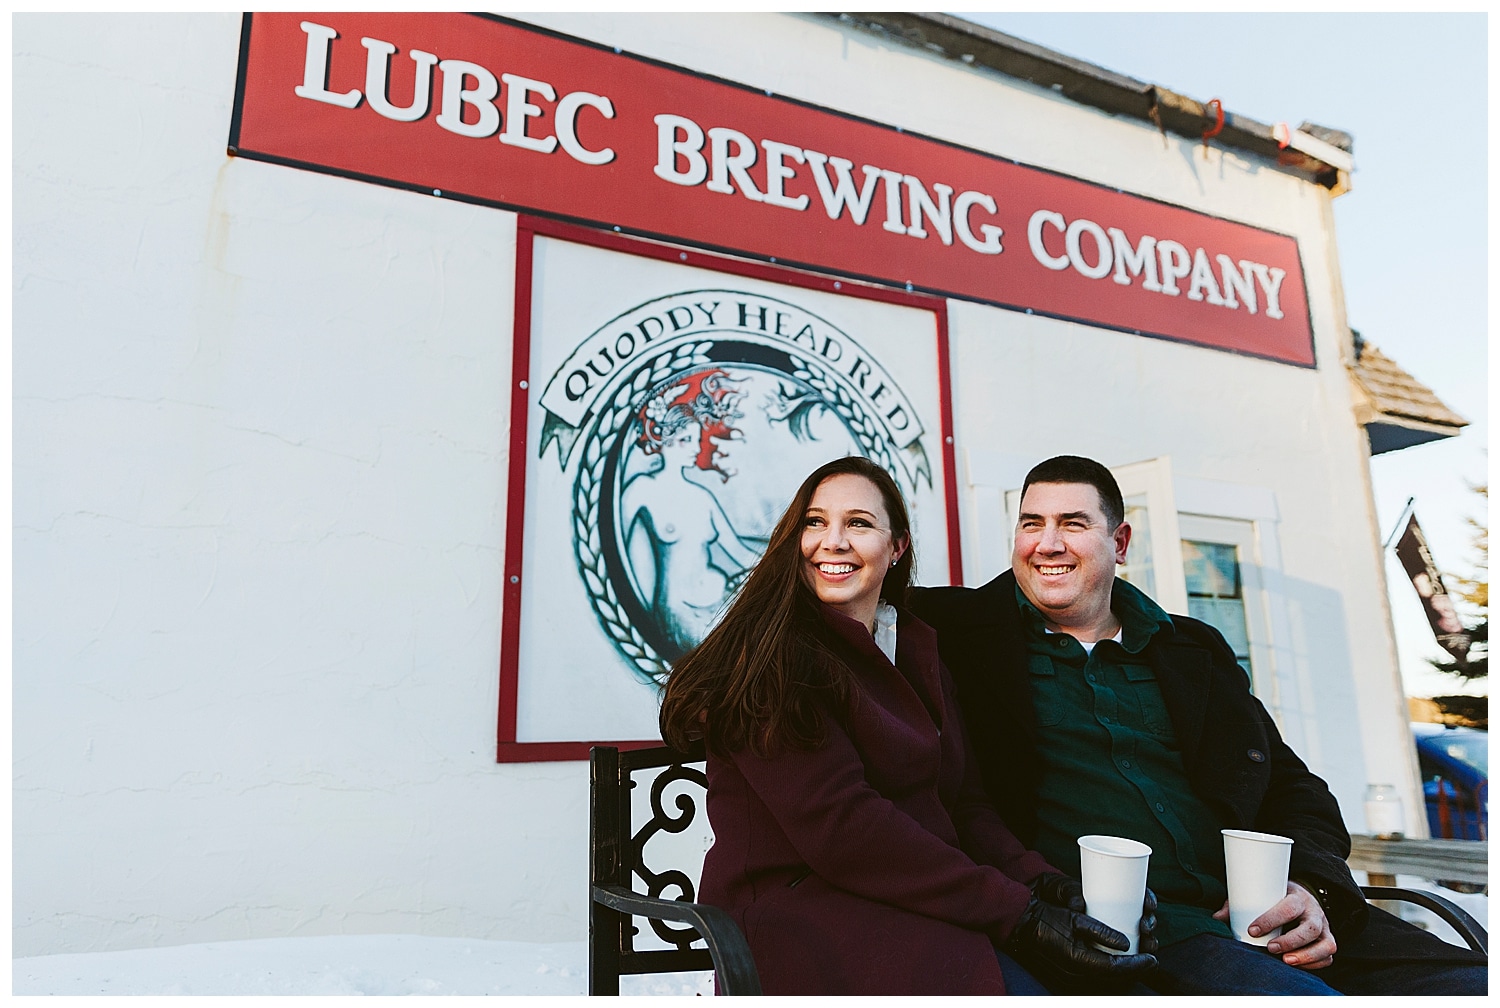 Engagement photos in Lubec, Maine at Lubec Brewing